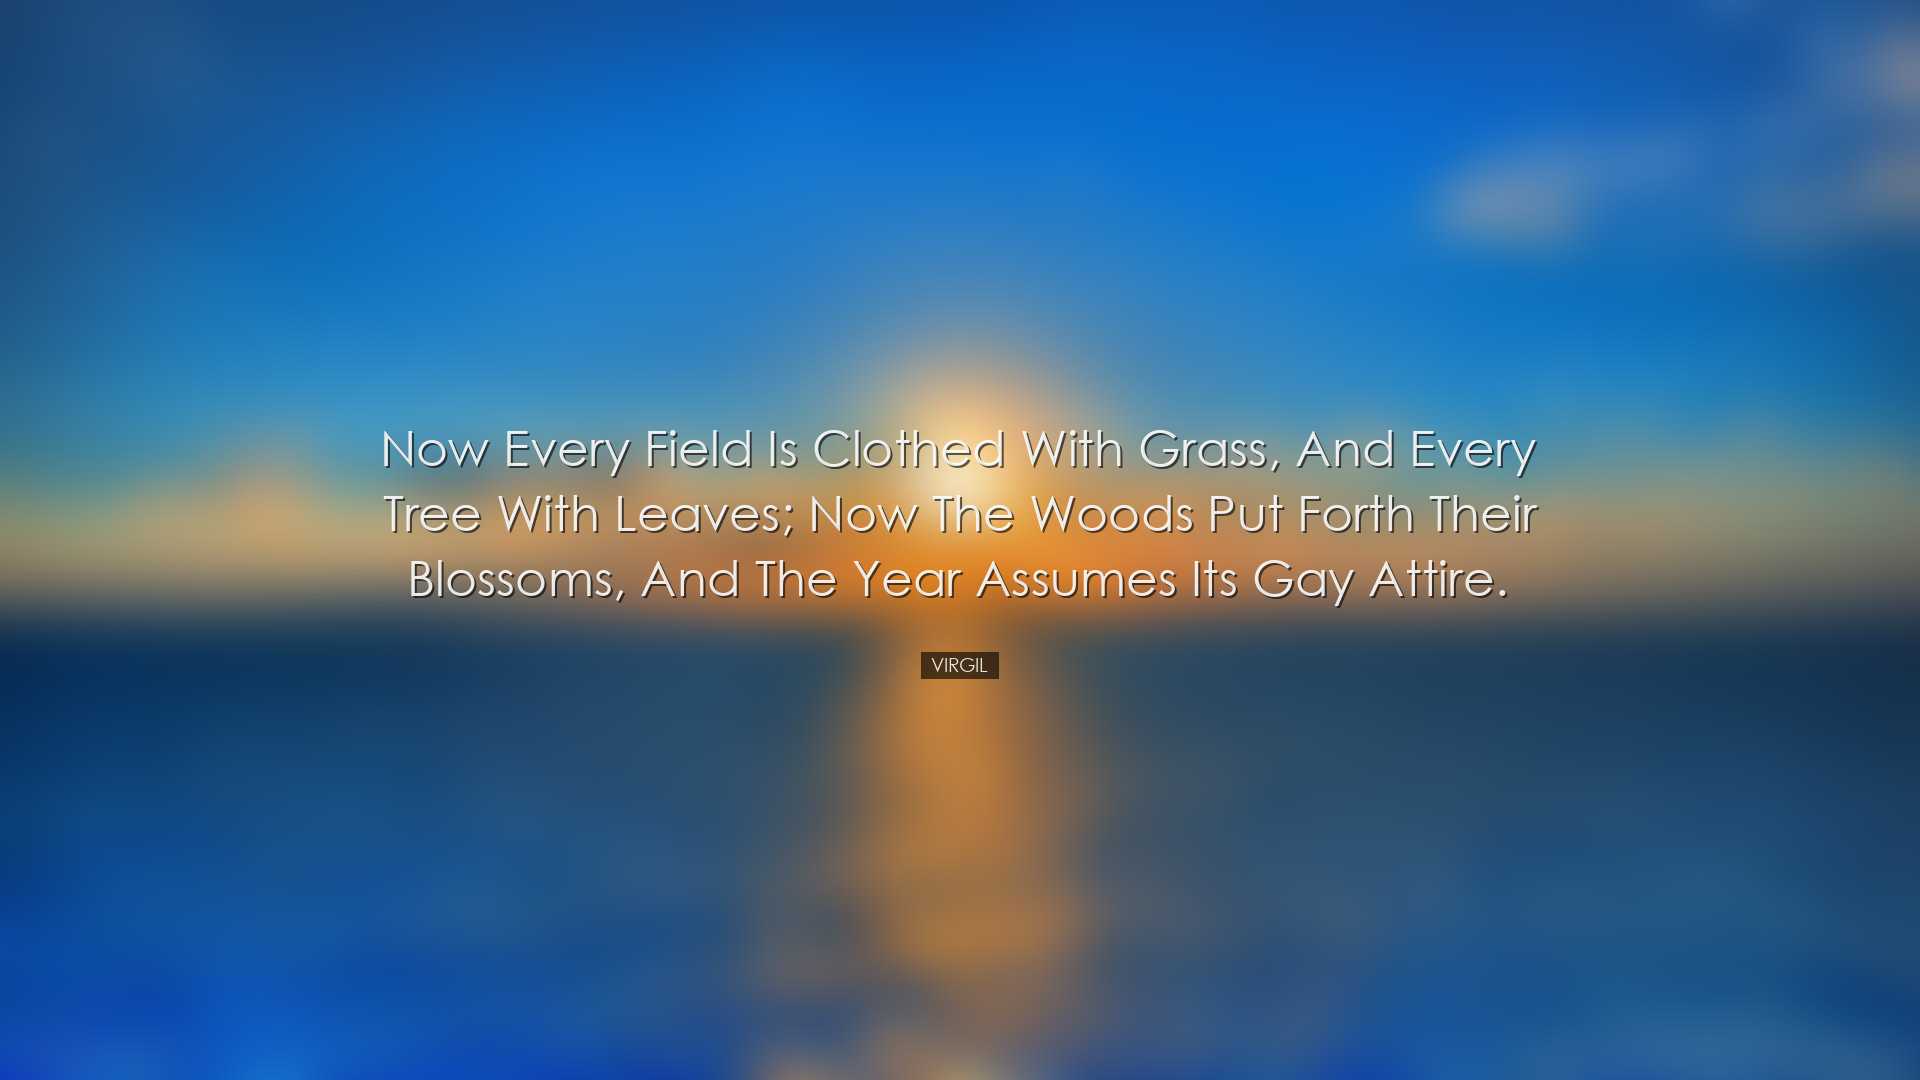 Now every field is clothed with grass, and every tree with leaves;